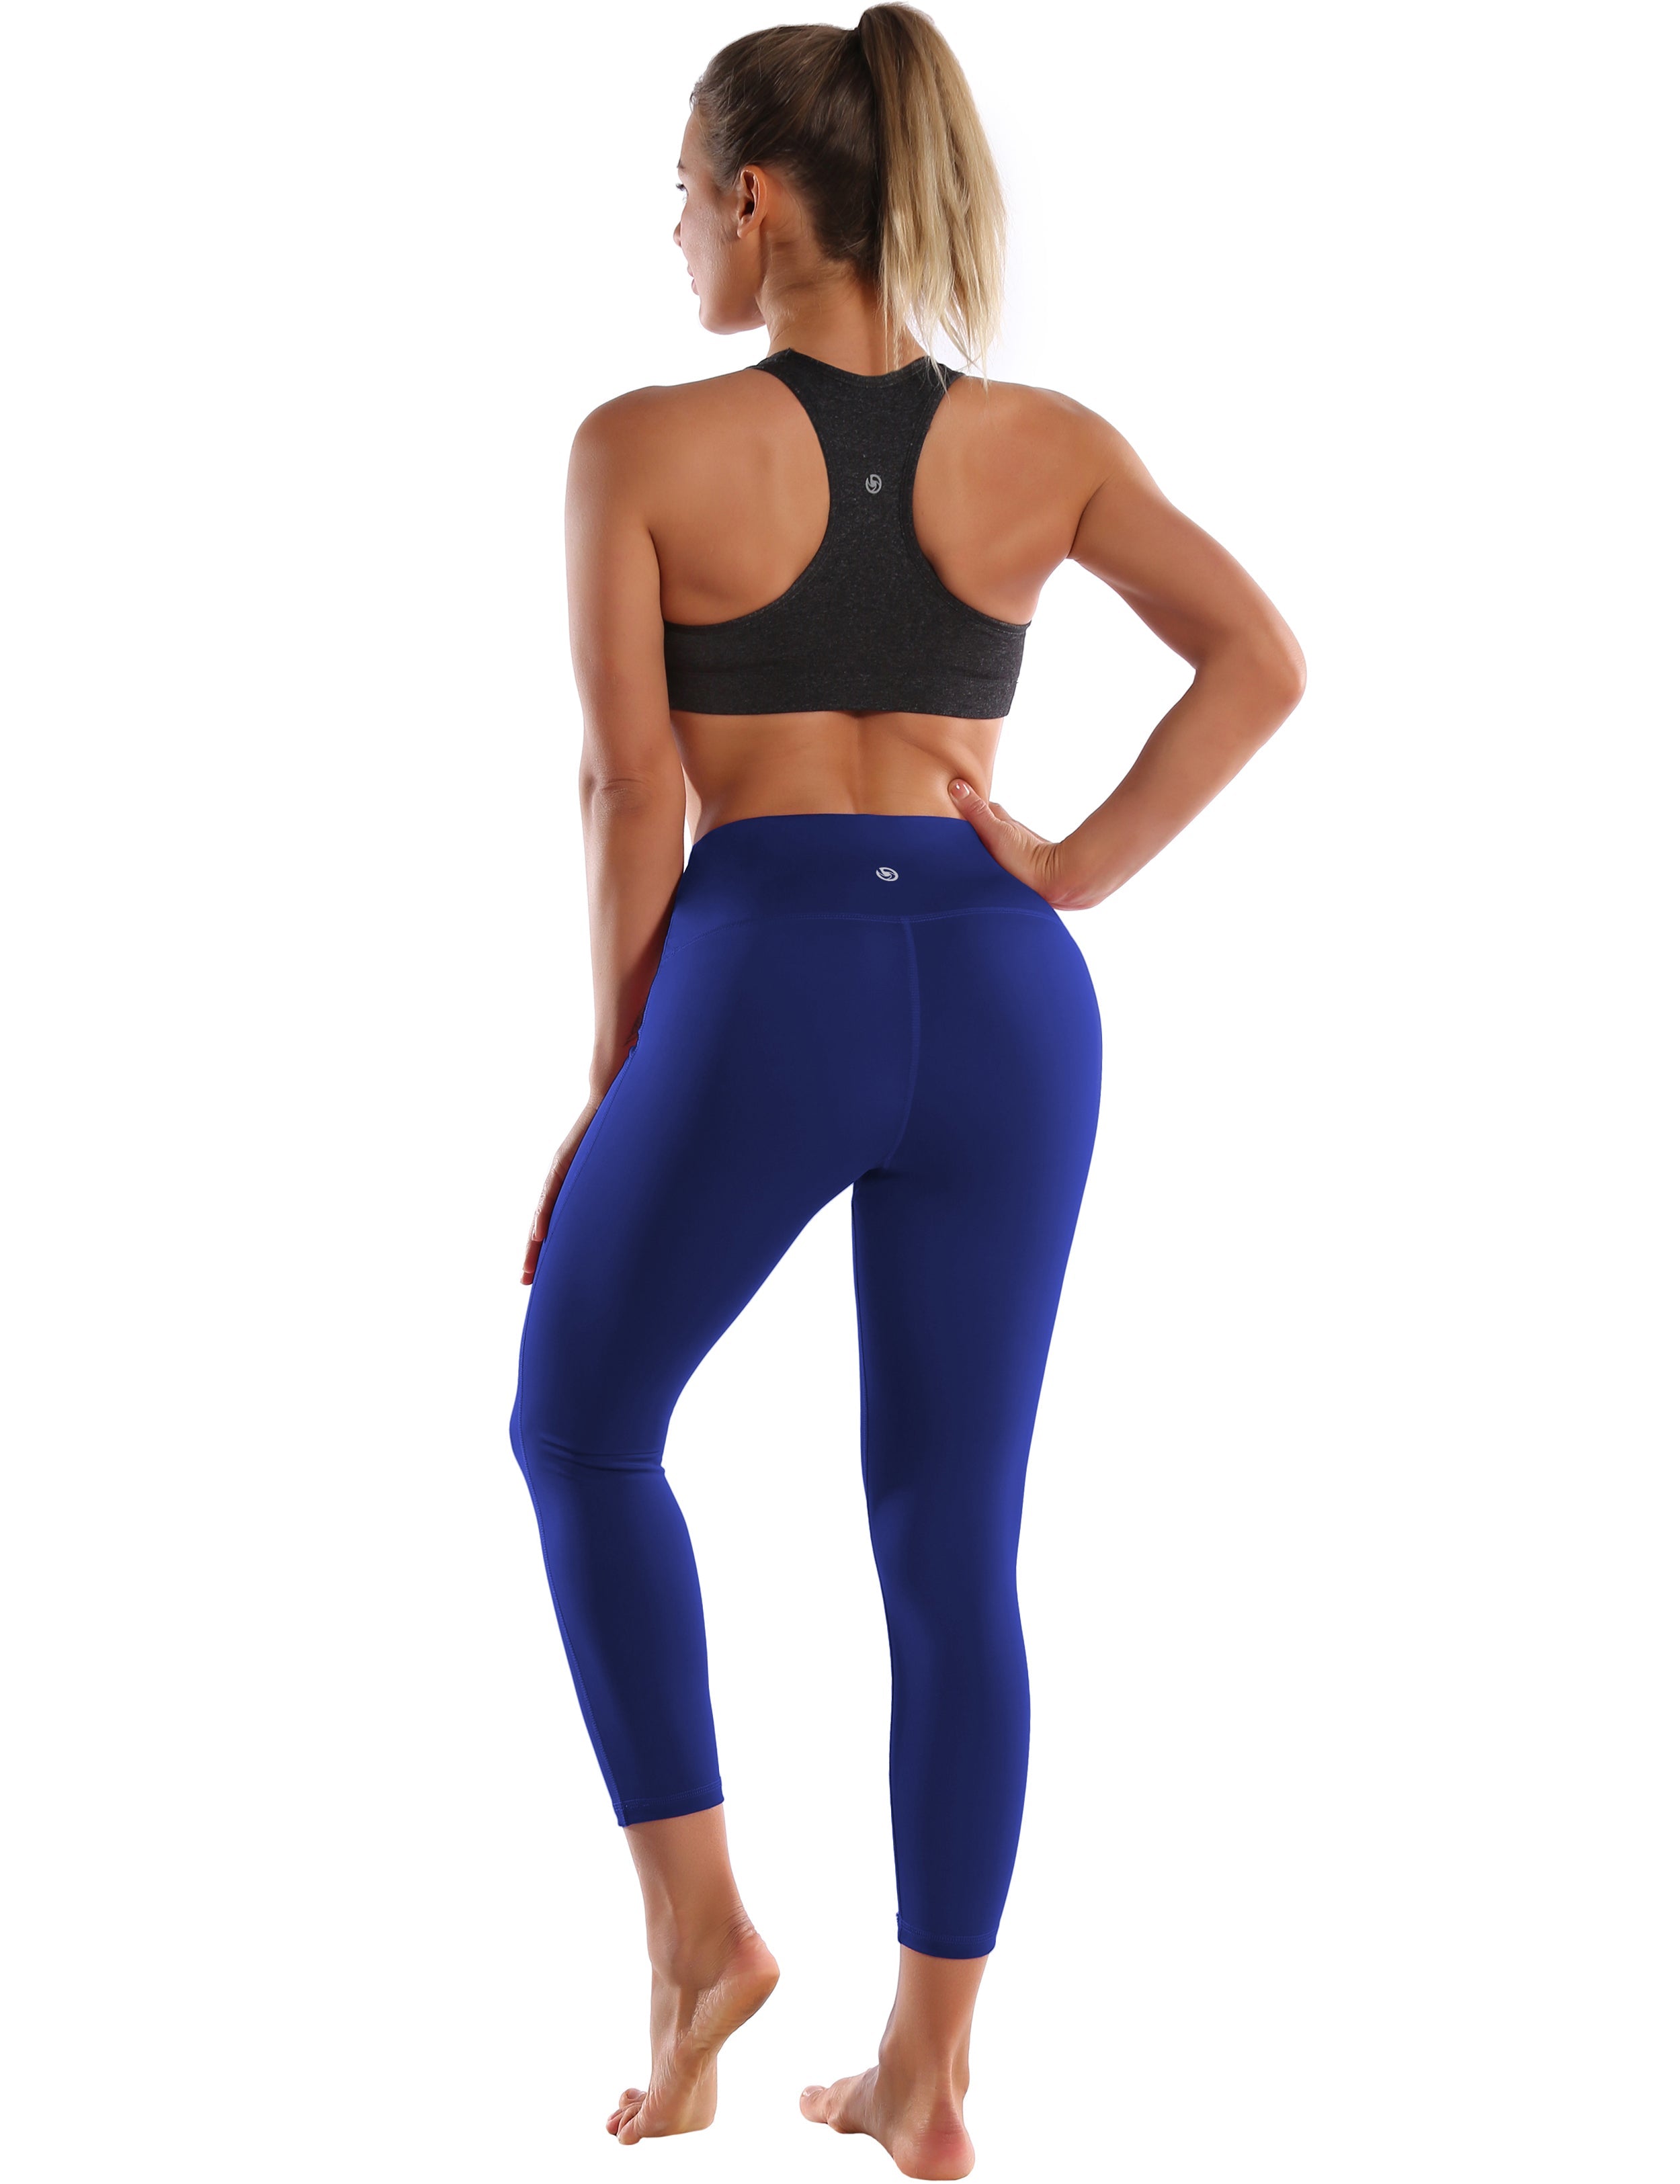 22" High Waist Side Line Capris navy 75%Nylon/25%Spandex Fabric doesn't attract lint easily 4-way stretch No see-through Moisture-wicking Tummy control Inner pocket